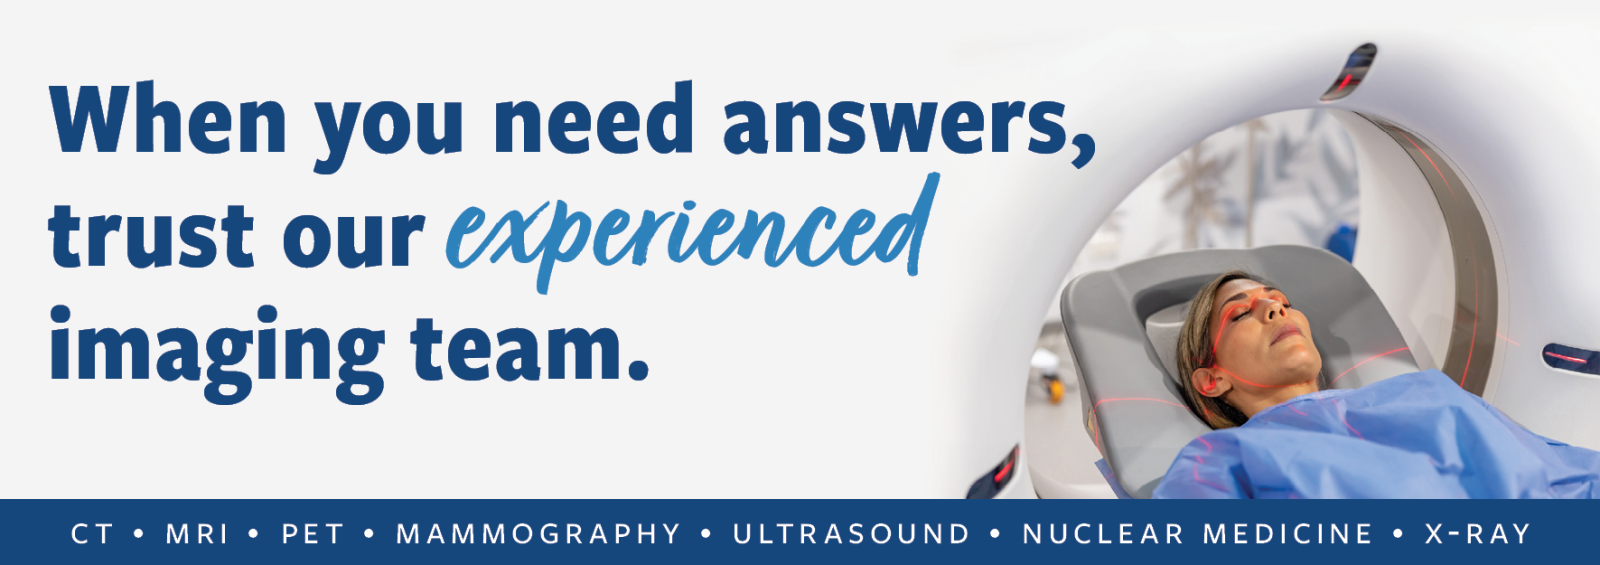 Woman receives an imaging study. Text reads, "When you need answers, trust our experienced imaging team."